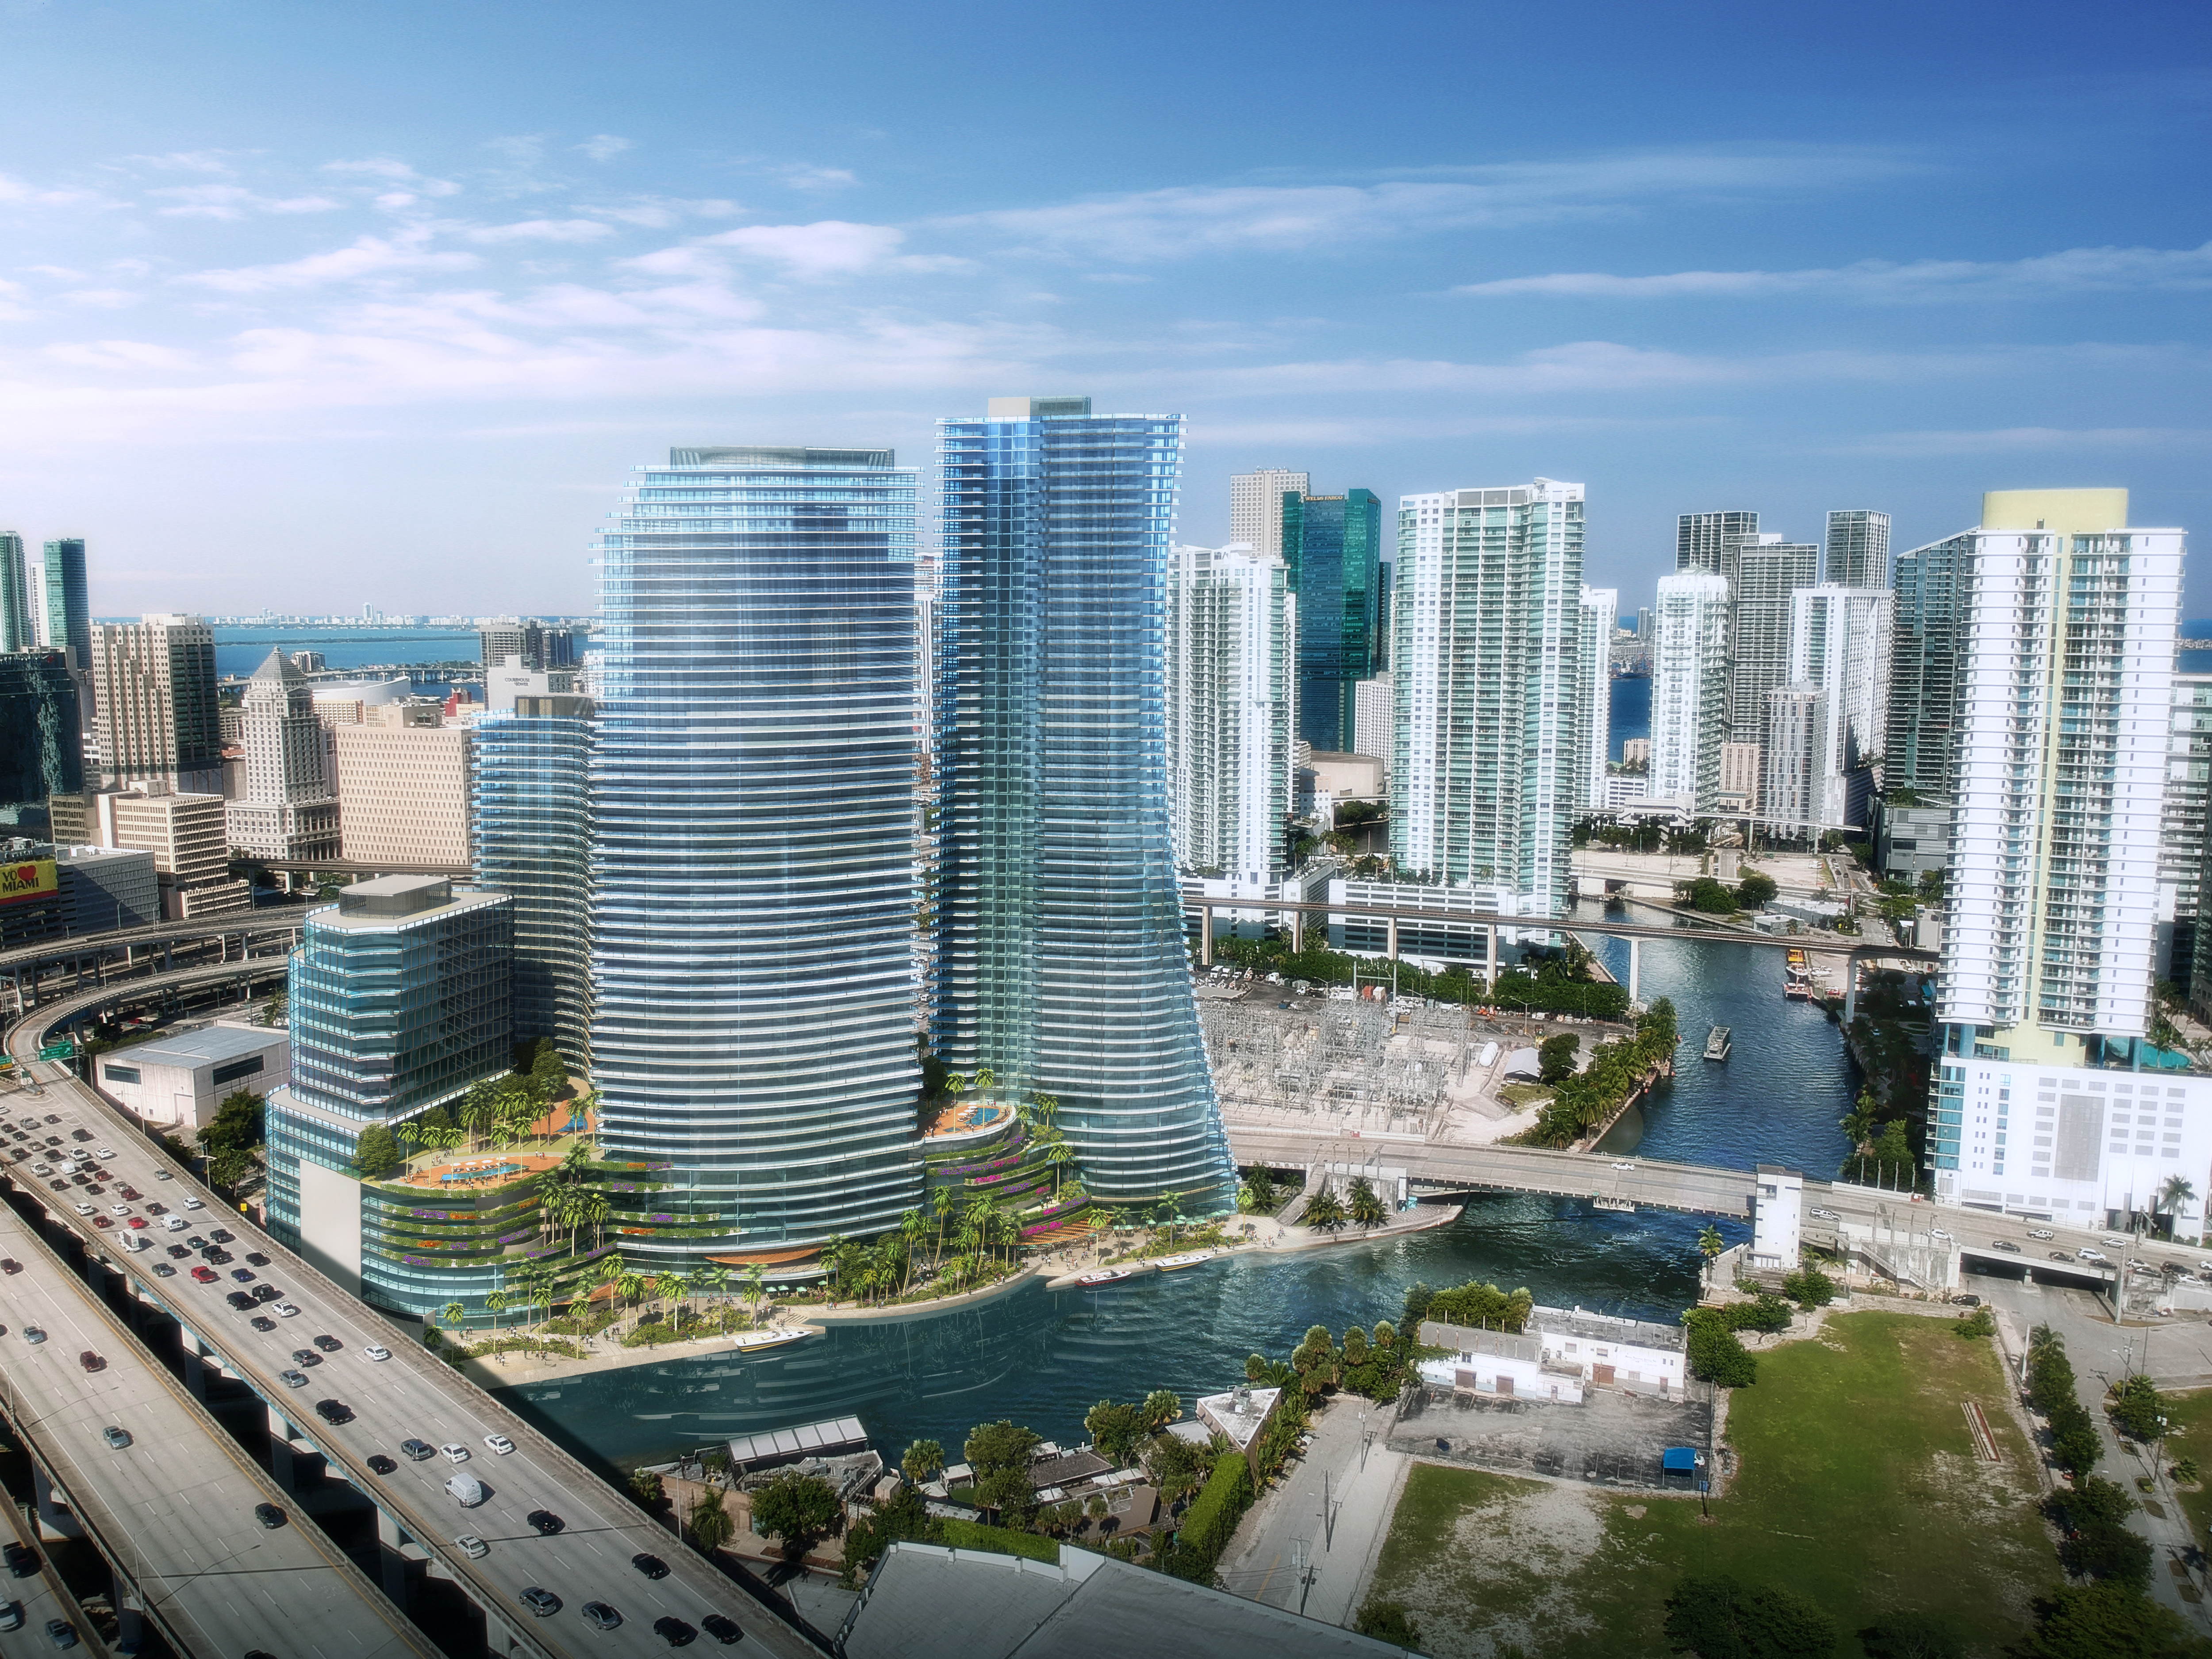 Modern Miami River apartment building at daytime with city in the background.